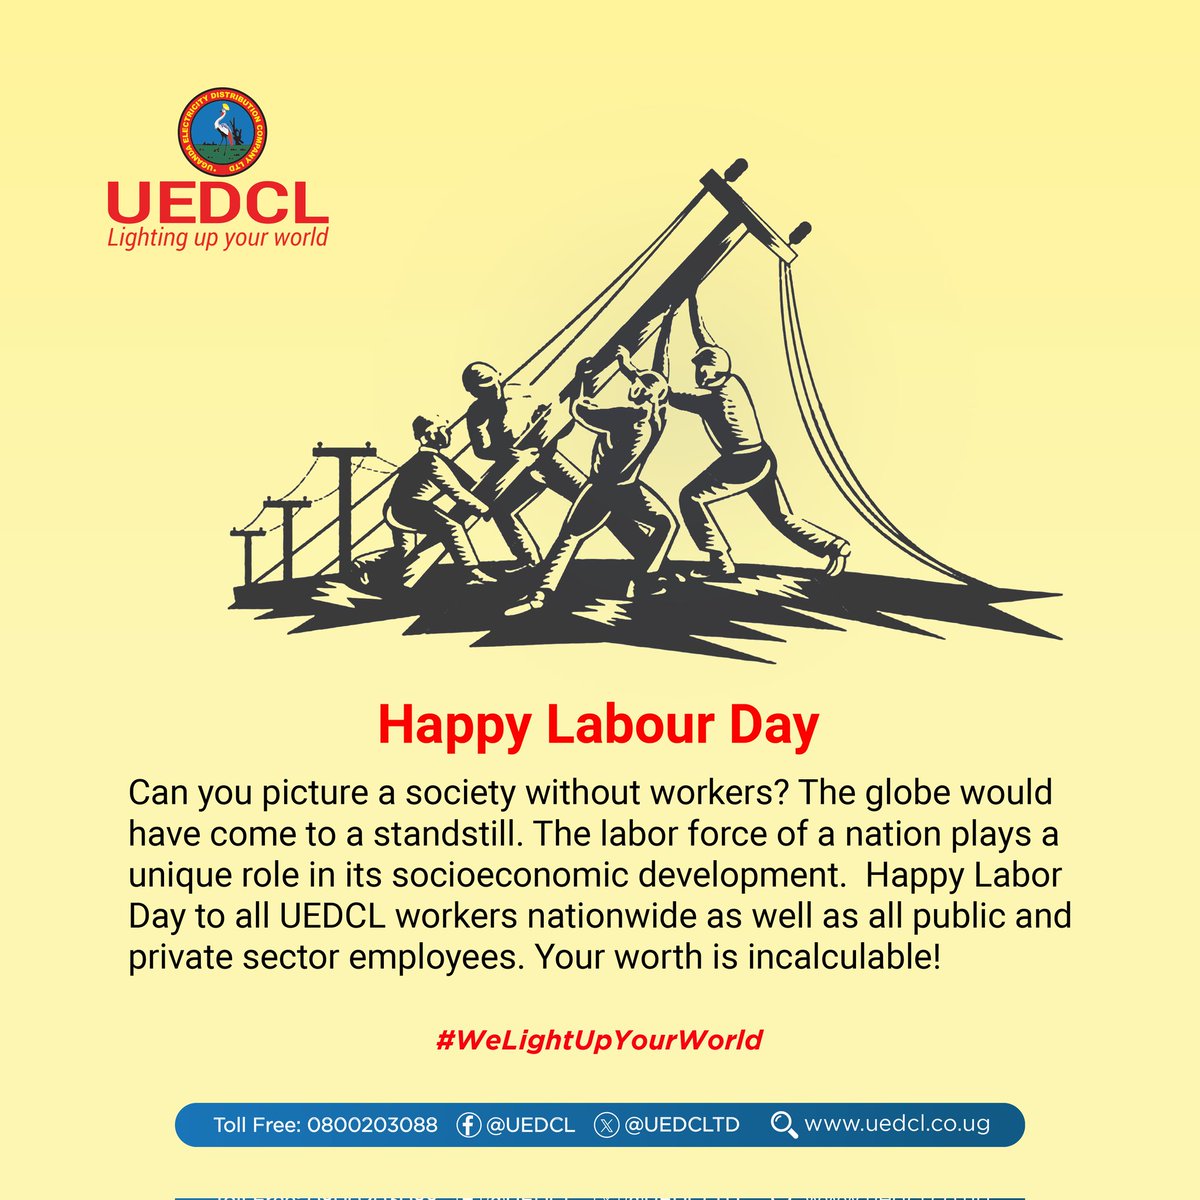 #UEDCLUpdate: Salutations to all UEDCL staff nationwide. Wishing a happy labour day to all GoU employees & labour force in Uganda. Your work contributes to making Uganda a better place. #WeLightUpYourWorld #HappyLaborDay